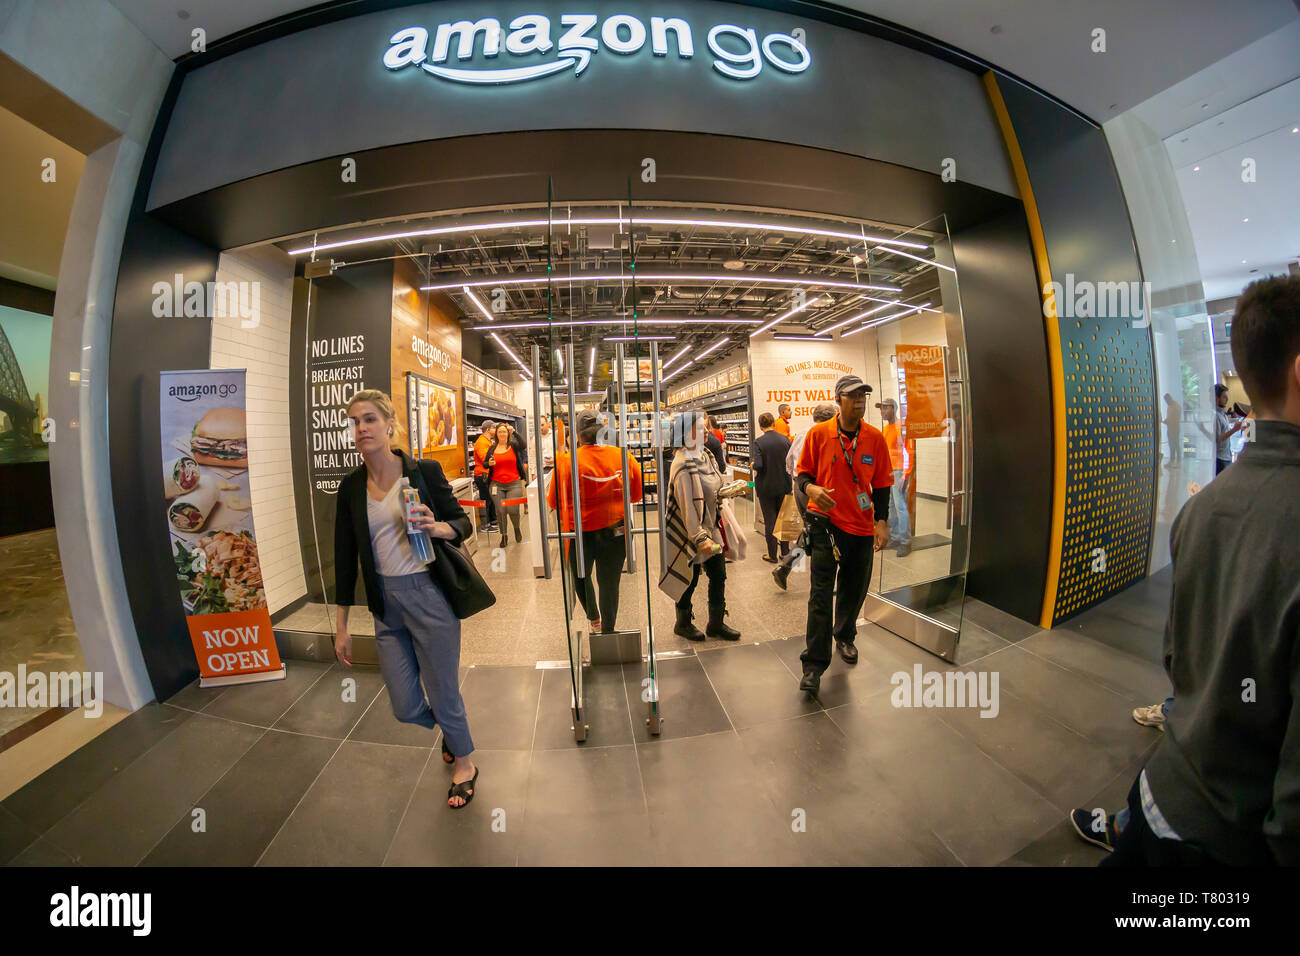 Excited customers shop at the Amazon Go store in the Brookfield Place mall in New York on its grand opening day, Tuesday, May 7, 2019. The 1300 square-foot store, mostly stocked with prepared foods and staples, enables a shopper with the Amazon Go app to just pick up an item and walk out with Amazon â€œtrackingâ€ your purchase and charging you. In a twist from other Amazon Go stores, this one accepts cash also, after facing progressive criticism. (Â© Richard B. Levine) Stock Photo